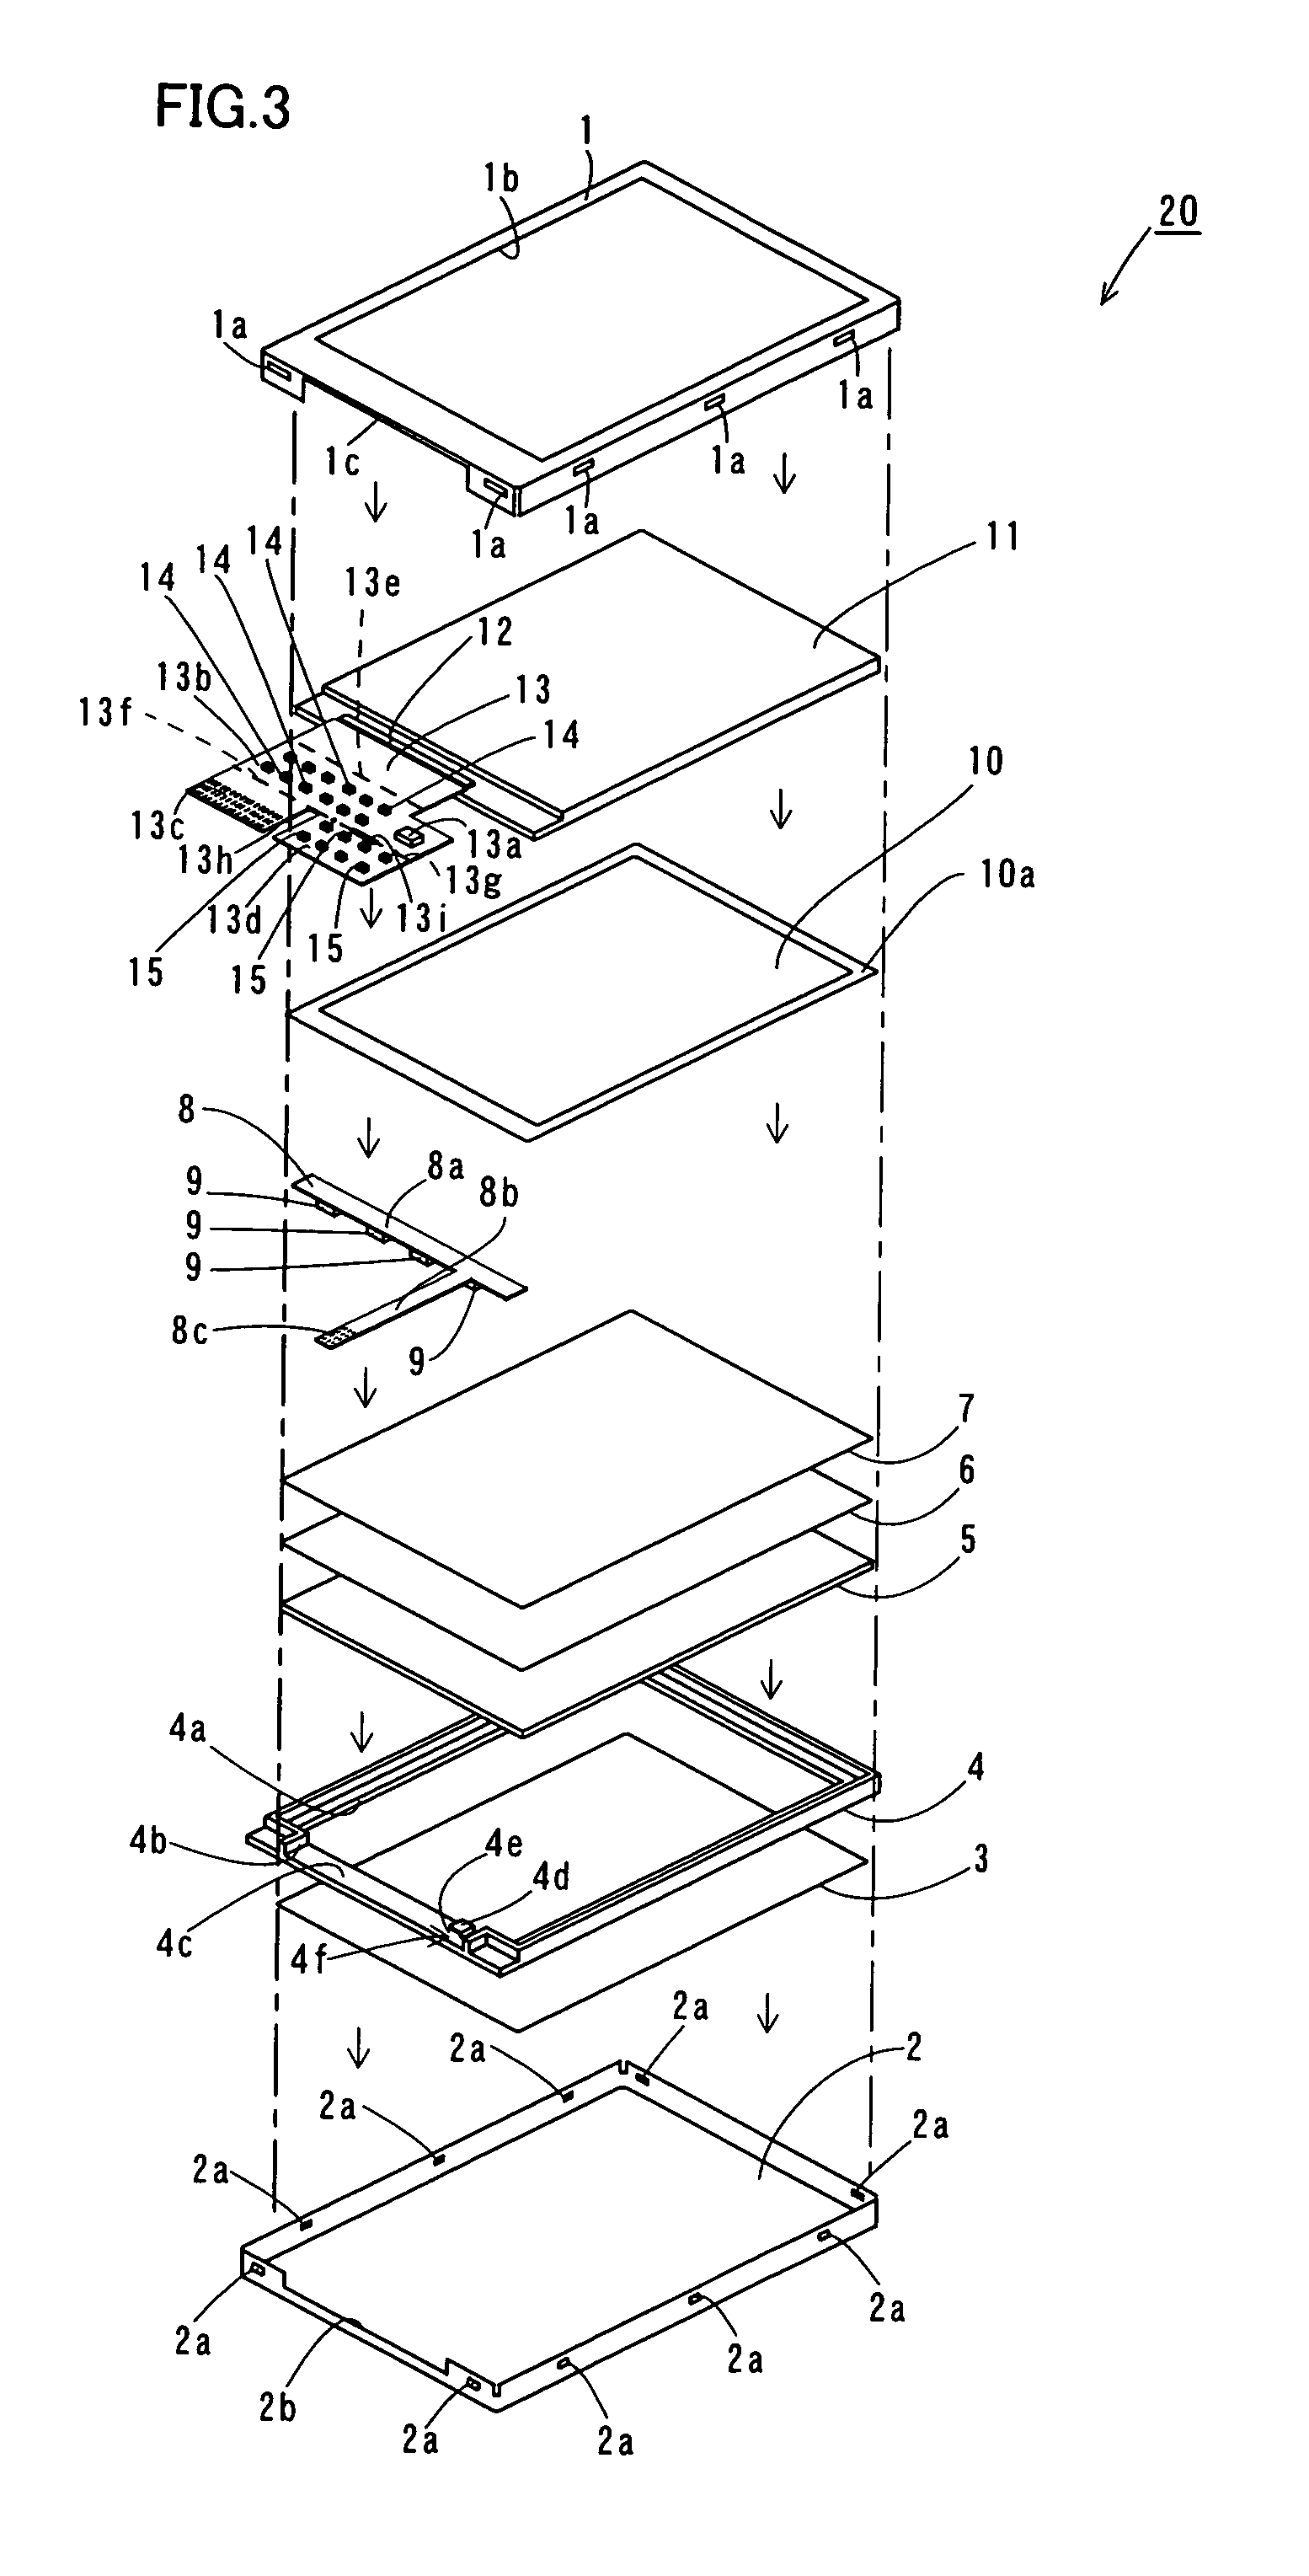 Display and mobile device